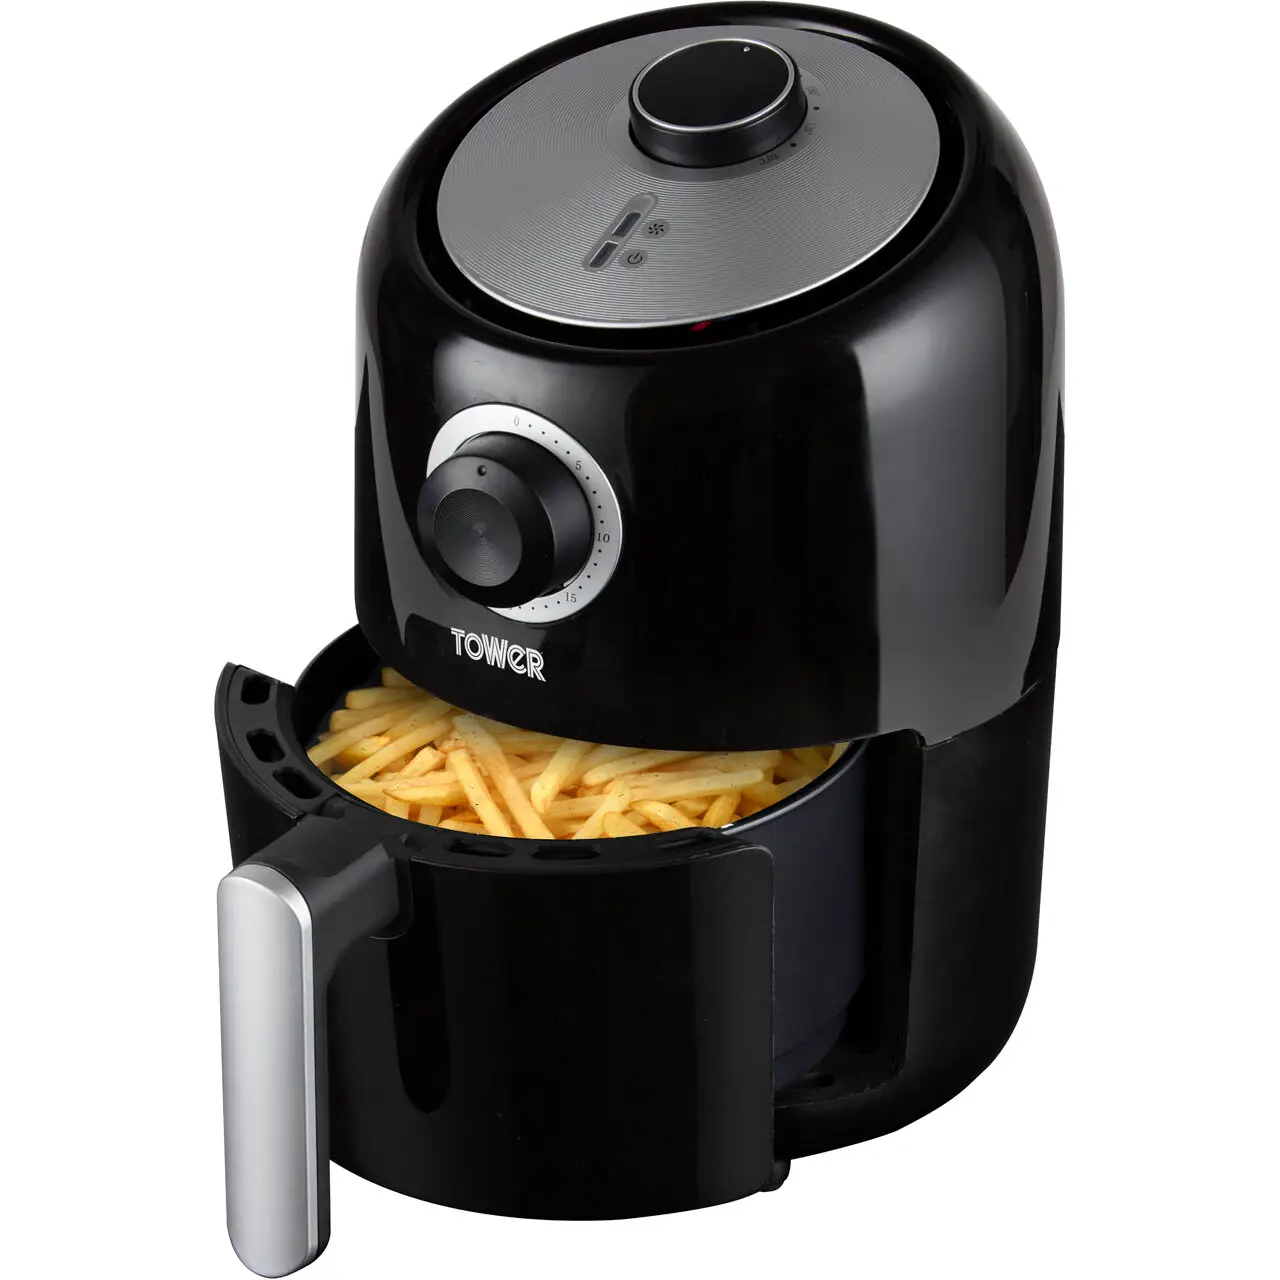 Tower T17026 Compact Air Fryer